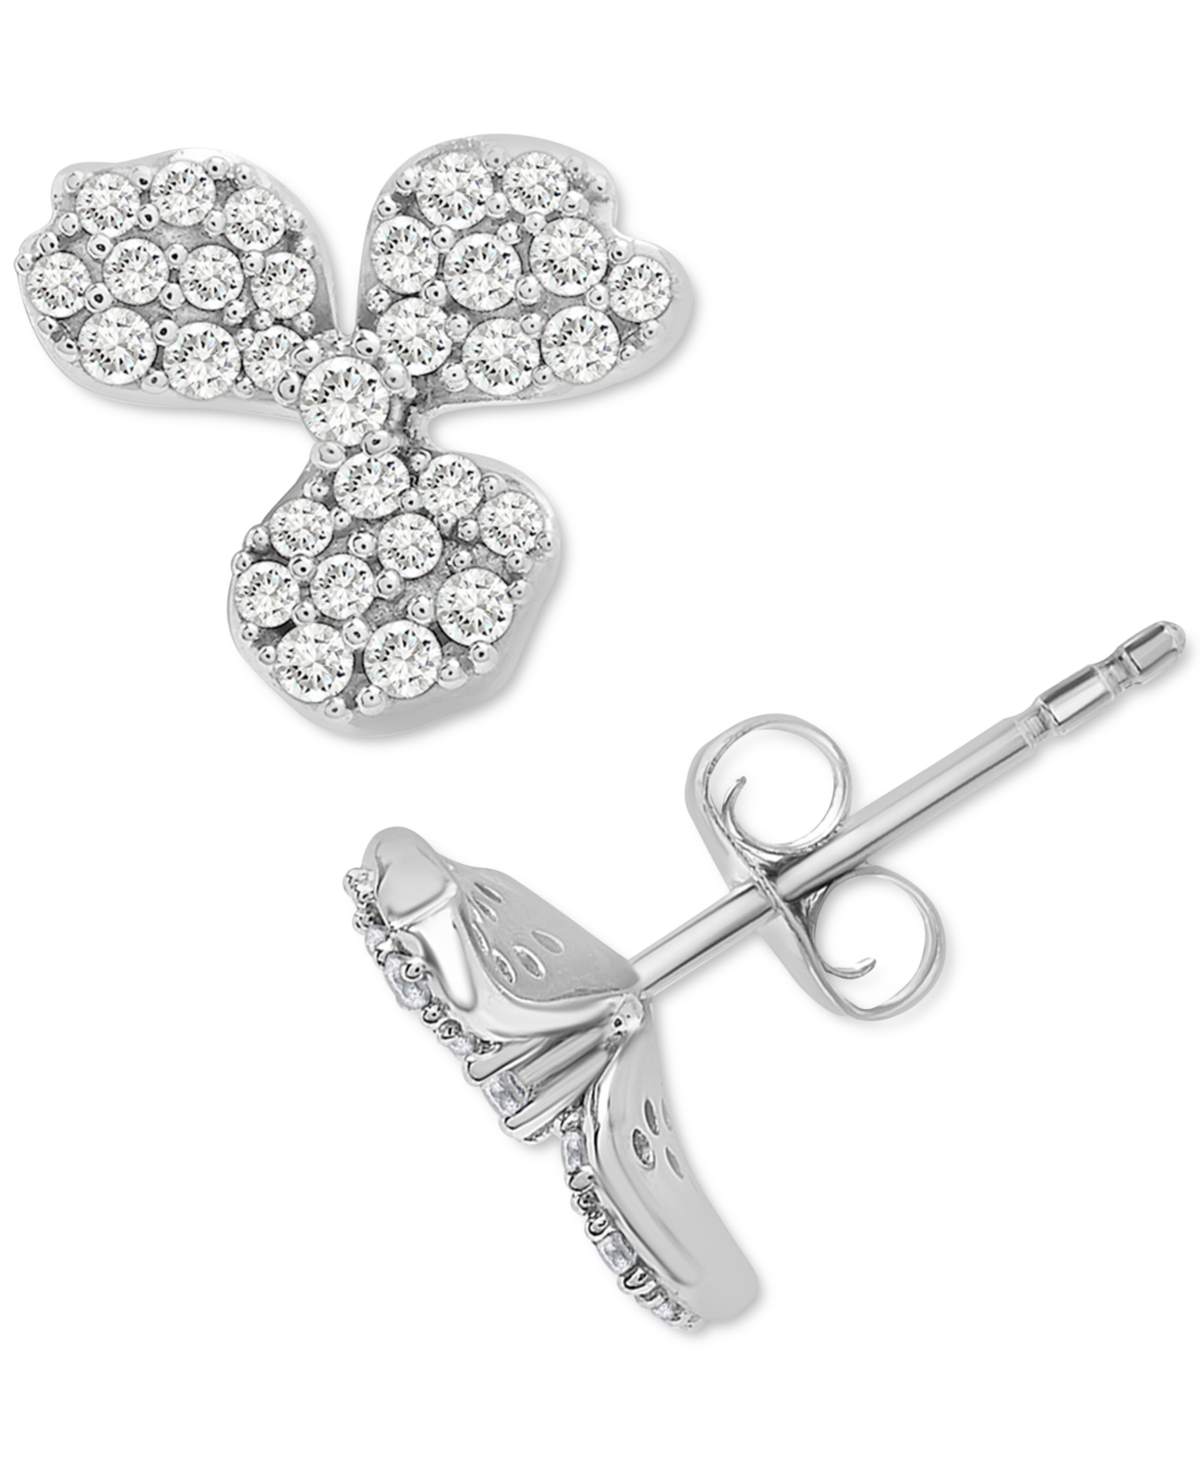 Wrapped In Love Diamond Clover Stud Earrings (1/2 Ct. T.w.) In 14k White Gold, Created For Macy's